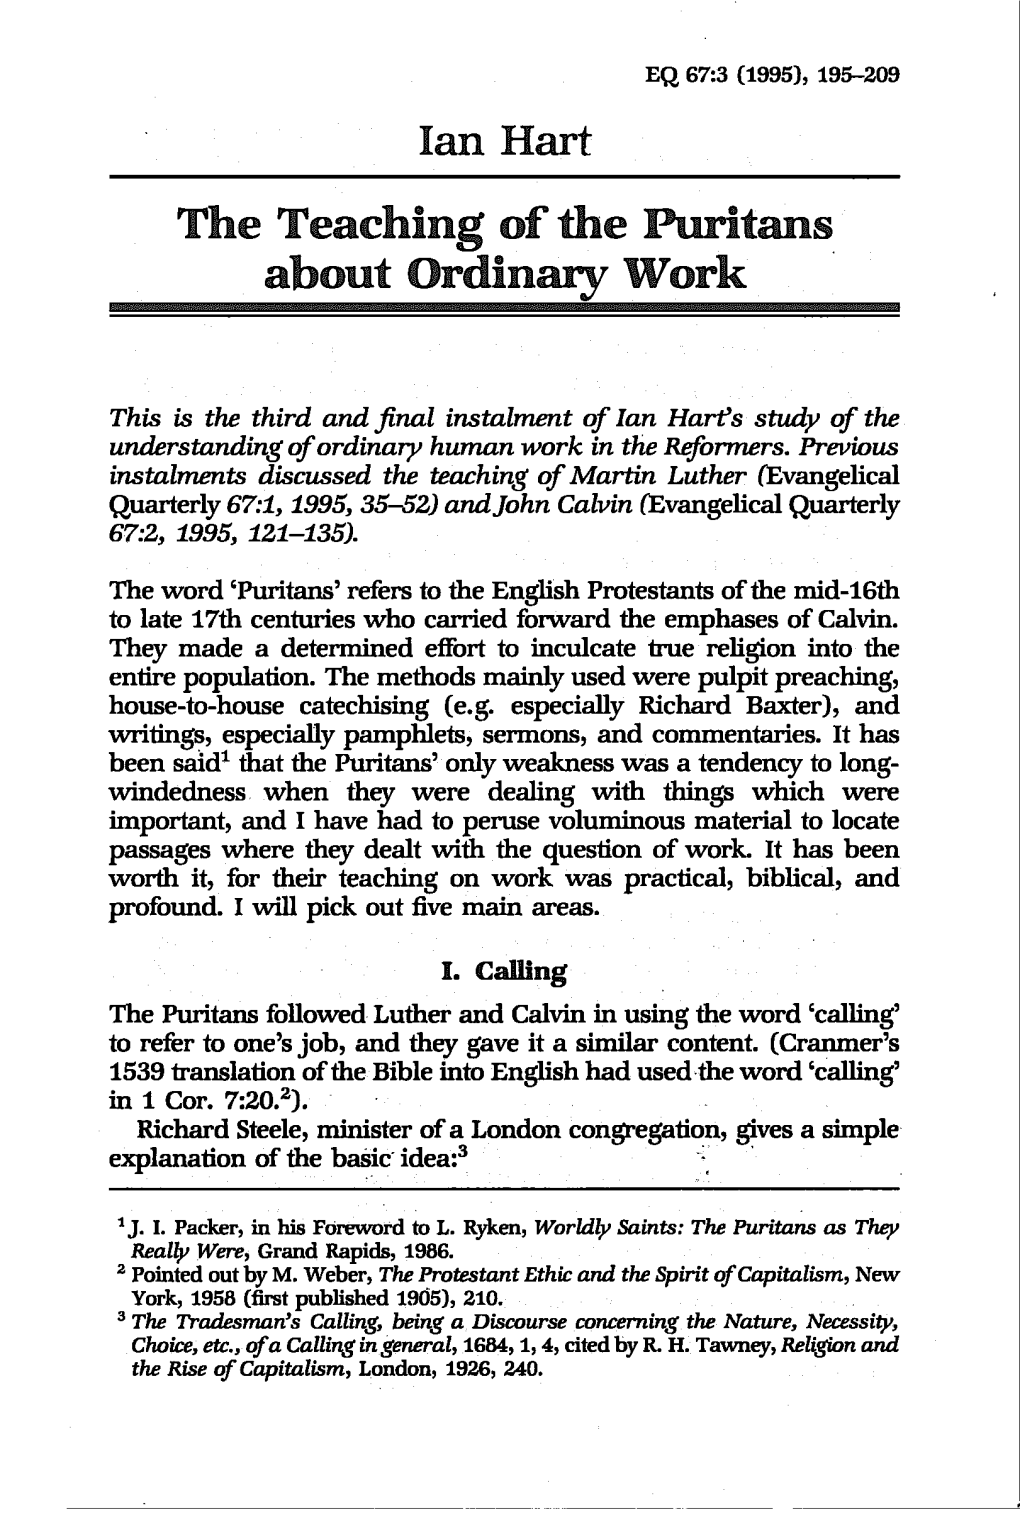 The Teaching of the Puritans About Ordinary Work